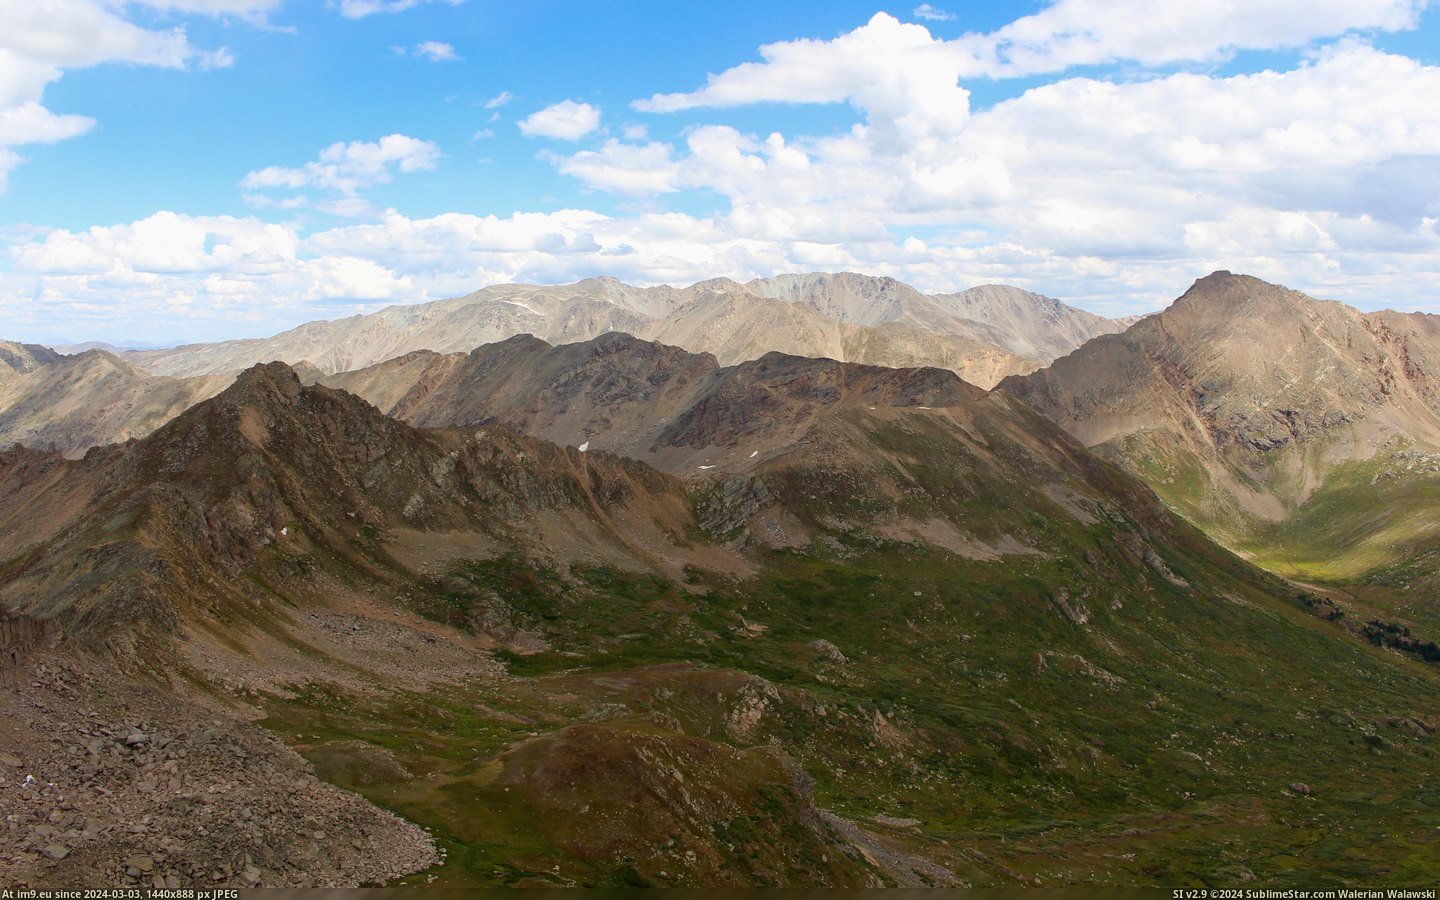 #Colorado #Peaks #Continental #Divide #Tundra #Alpine #Rockies [Earthporn] Craggy peaks and alpine tundra of the Colorado Rockies from the Continental Divide  [4637x2871] Pic. (Image of album My r/EARTHPORN favs))